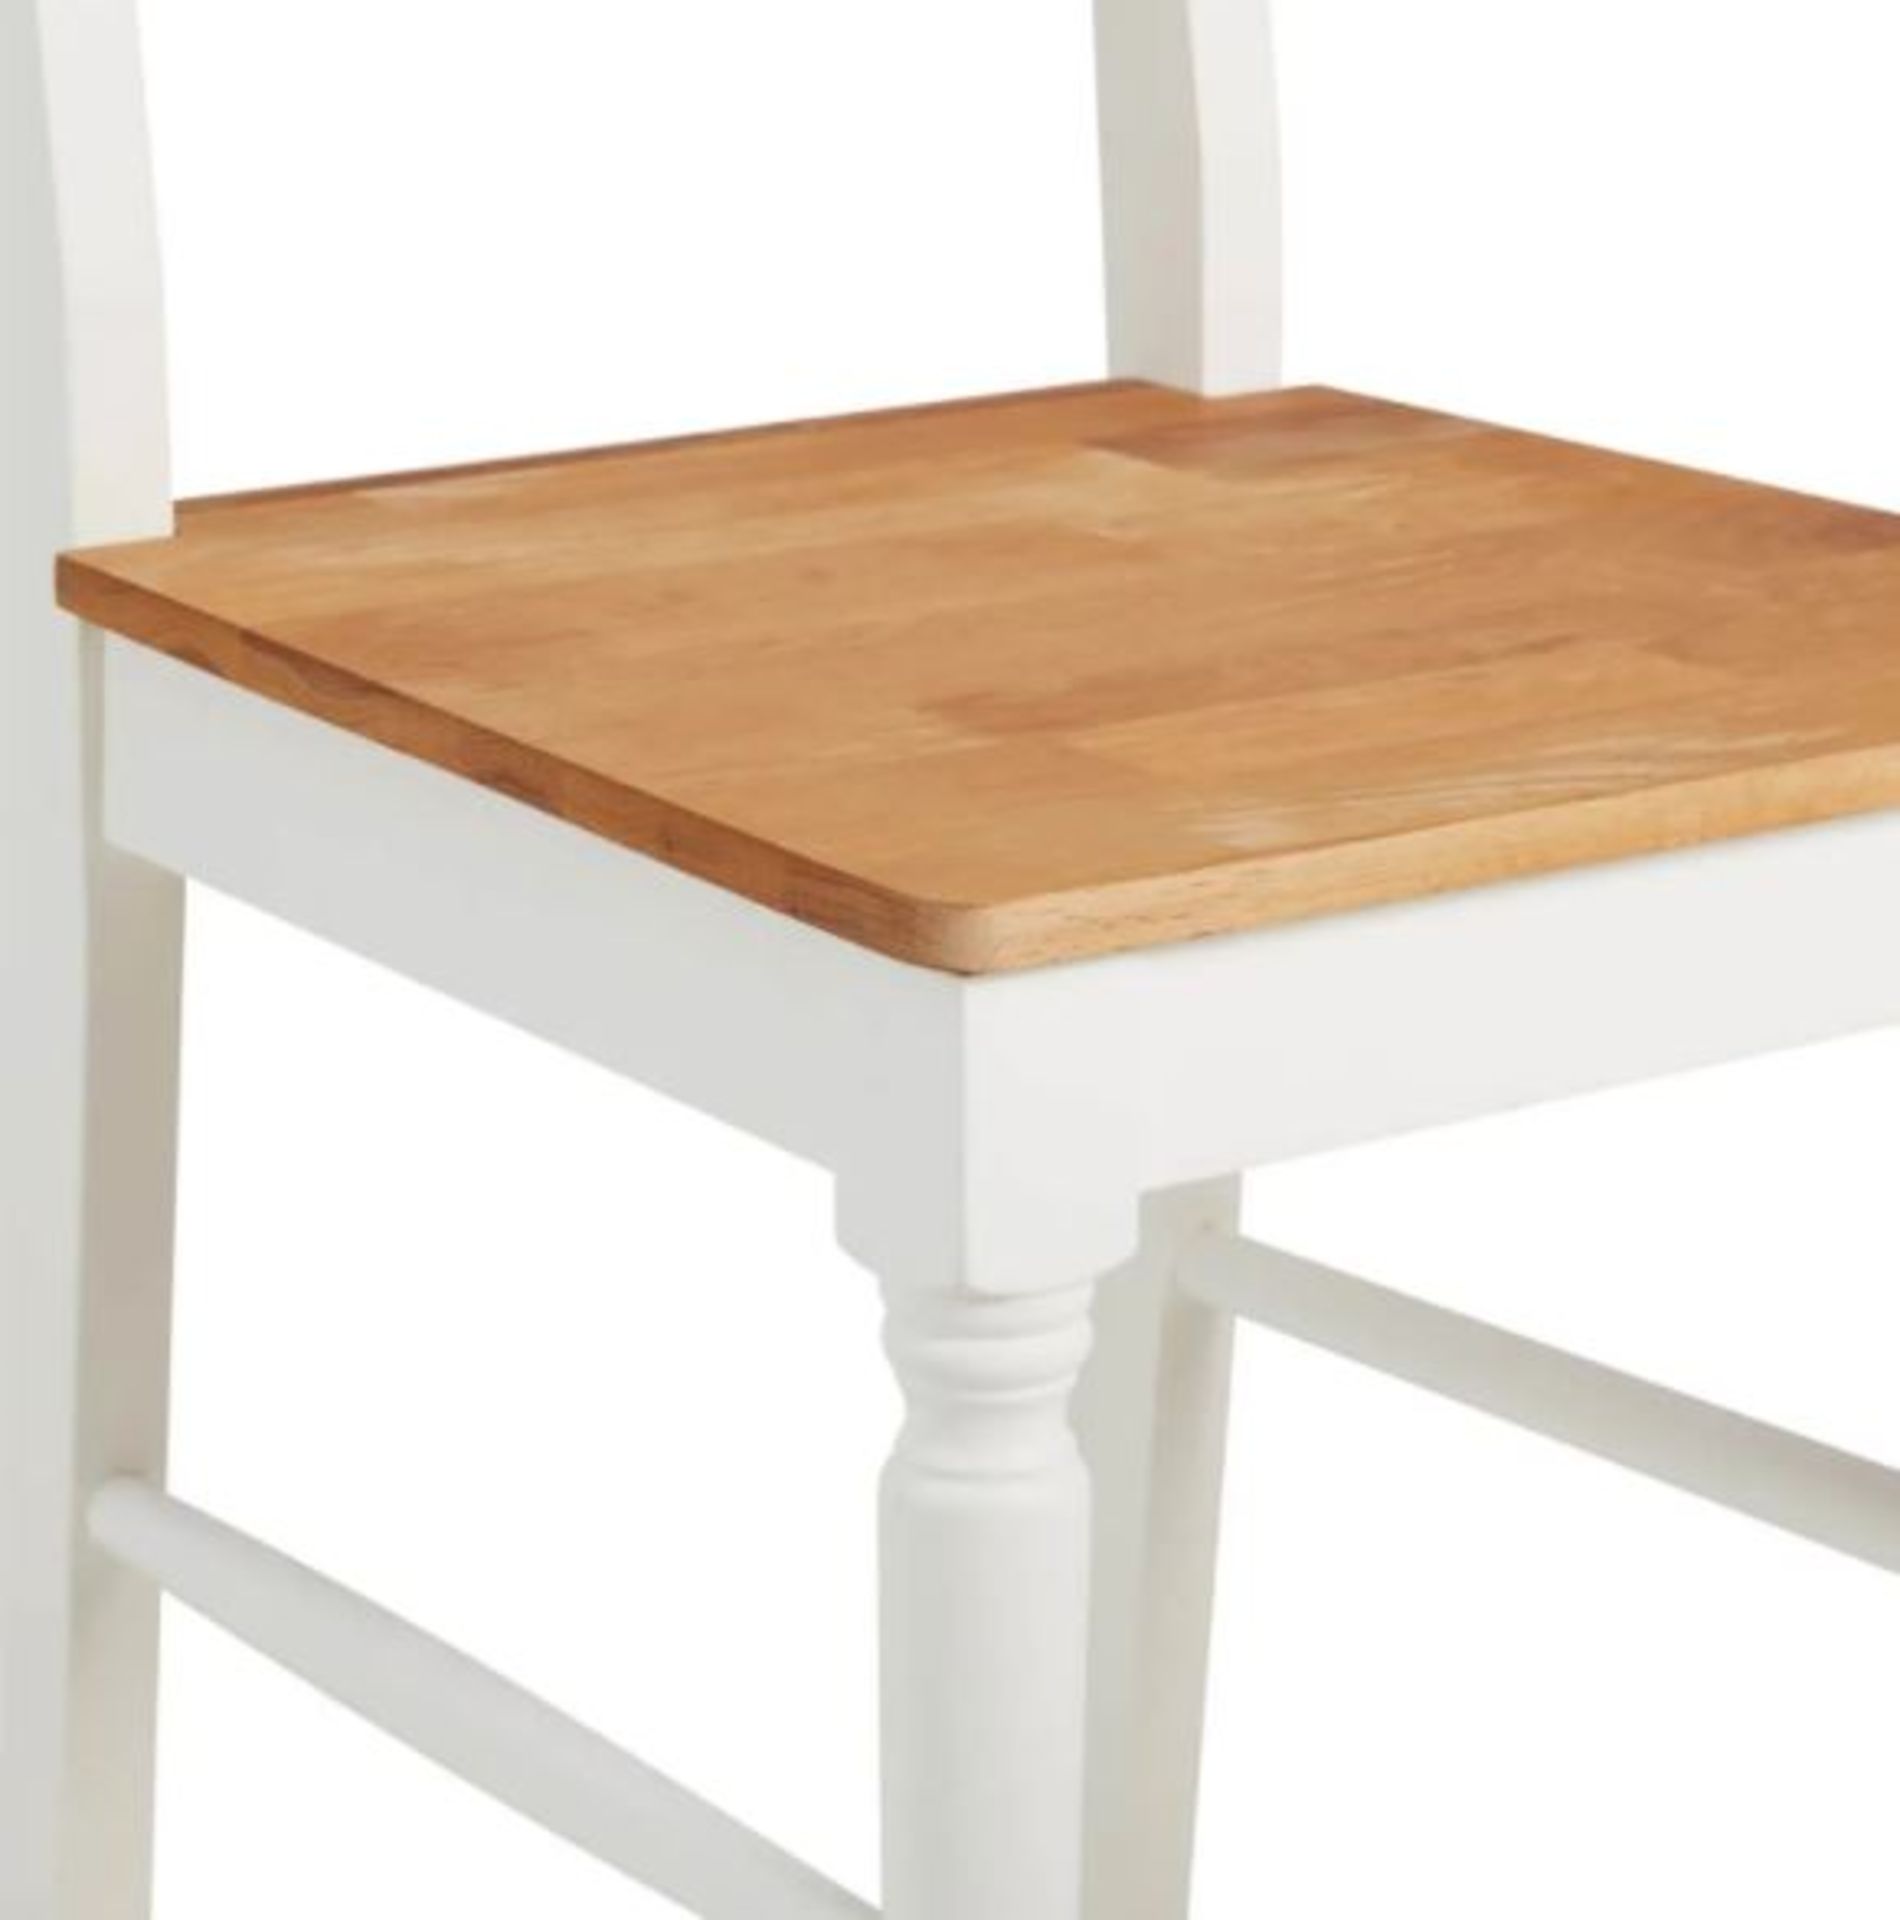 (R7G) 2x Laura Ladder Back Dining Chairs RRP £125. Solid Oak Seat. White Painted Pine Wood Legs. - Image 6 of 8